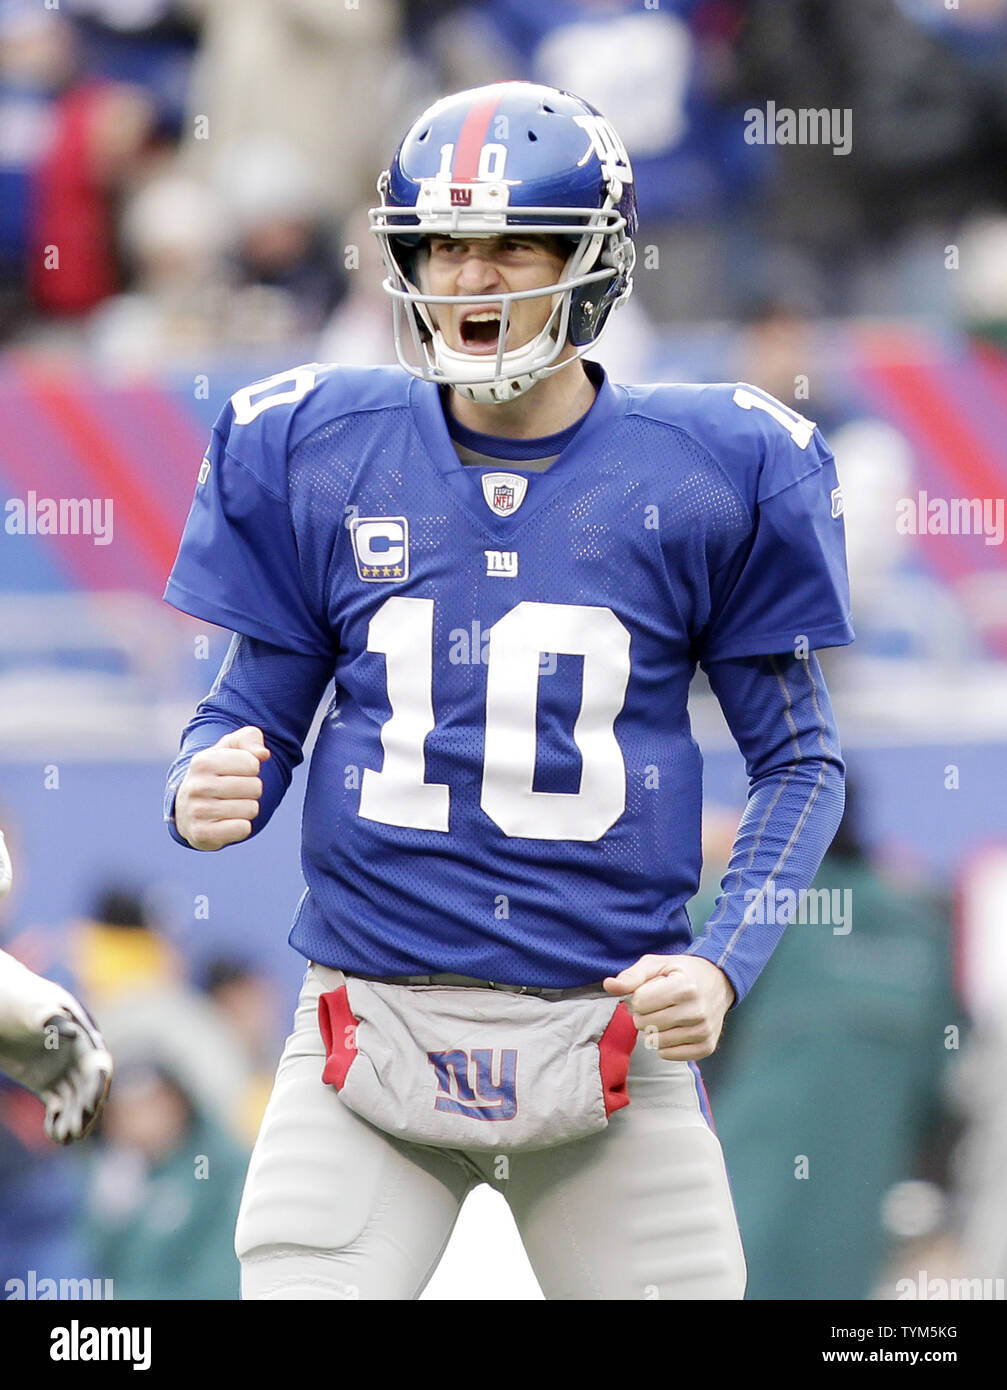 New York Giants Eli Manning reacts after throwing a 33 yard touchdown in  the second quarter against the Philadelphia Eagles at New Meadowlands  Stadium in week 15 of the NFL in East